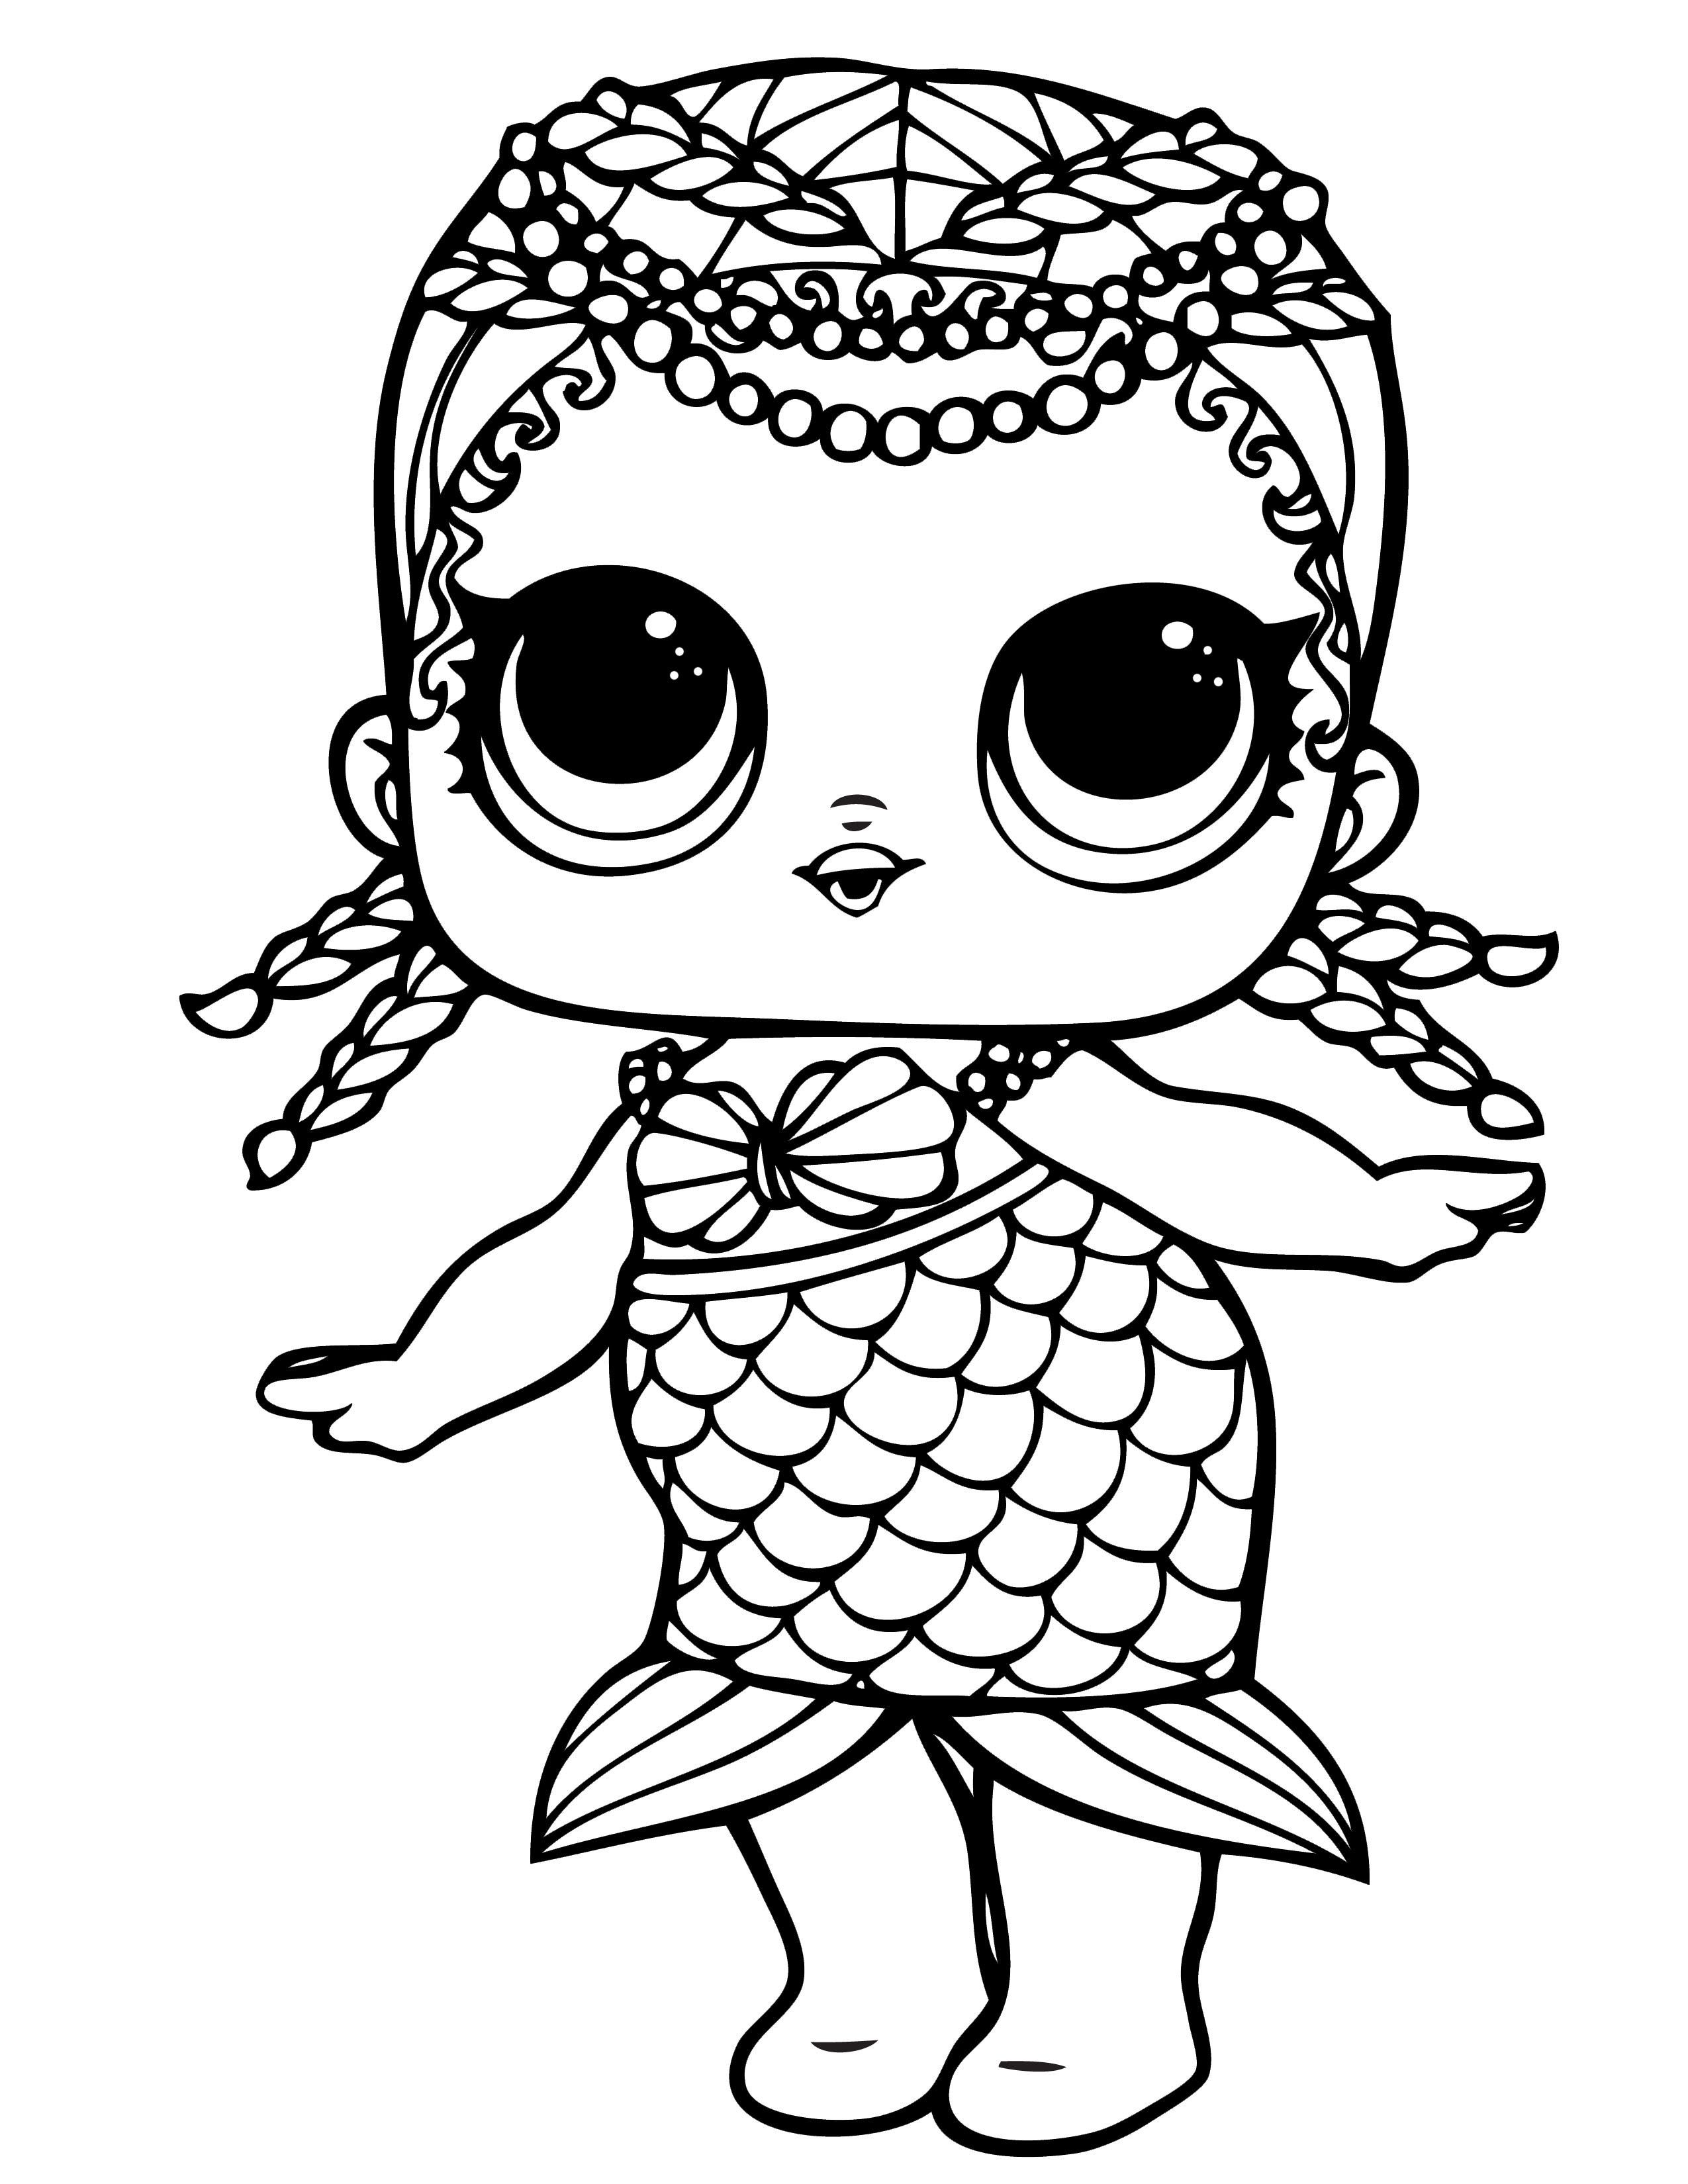 LOL Coloring Pages FREE Printable 21